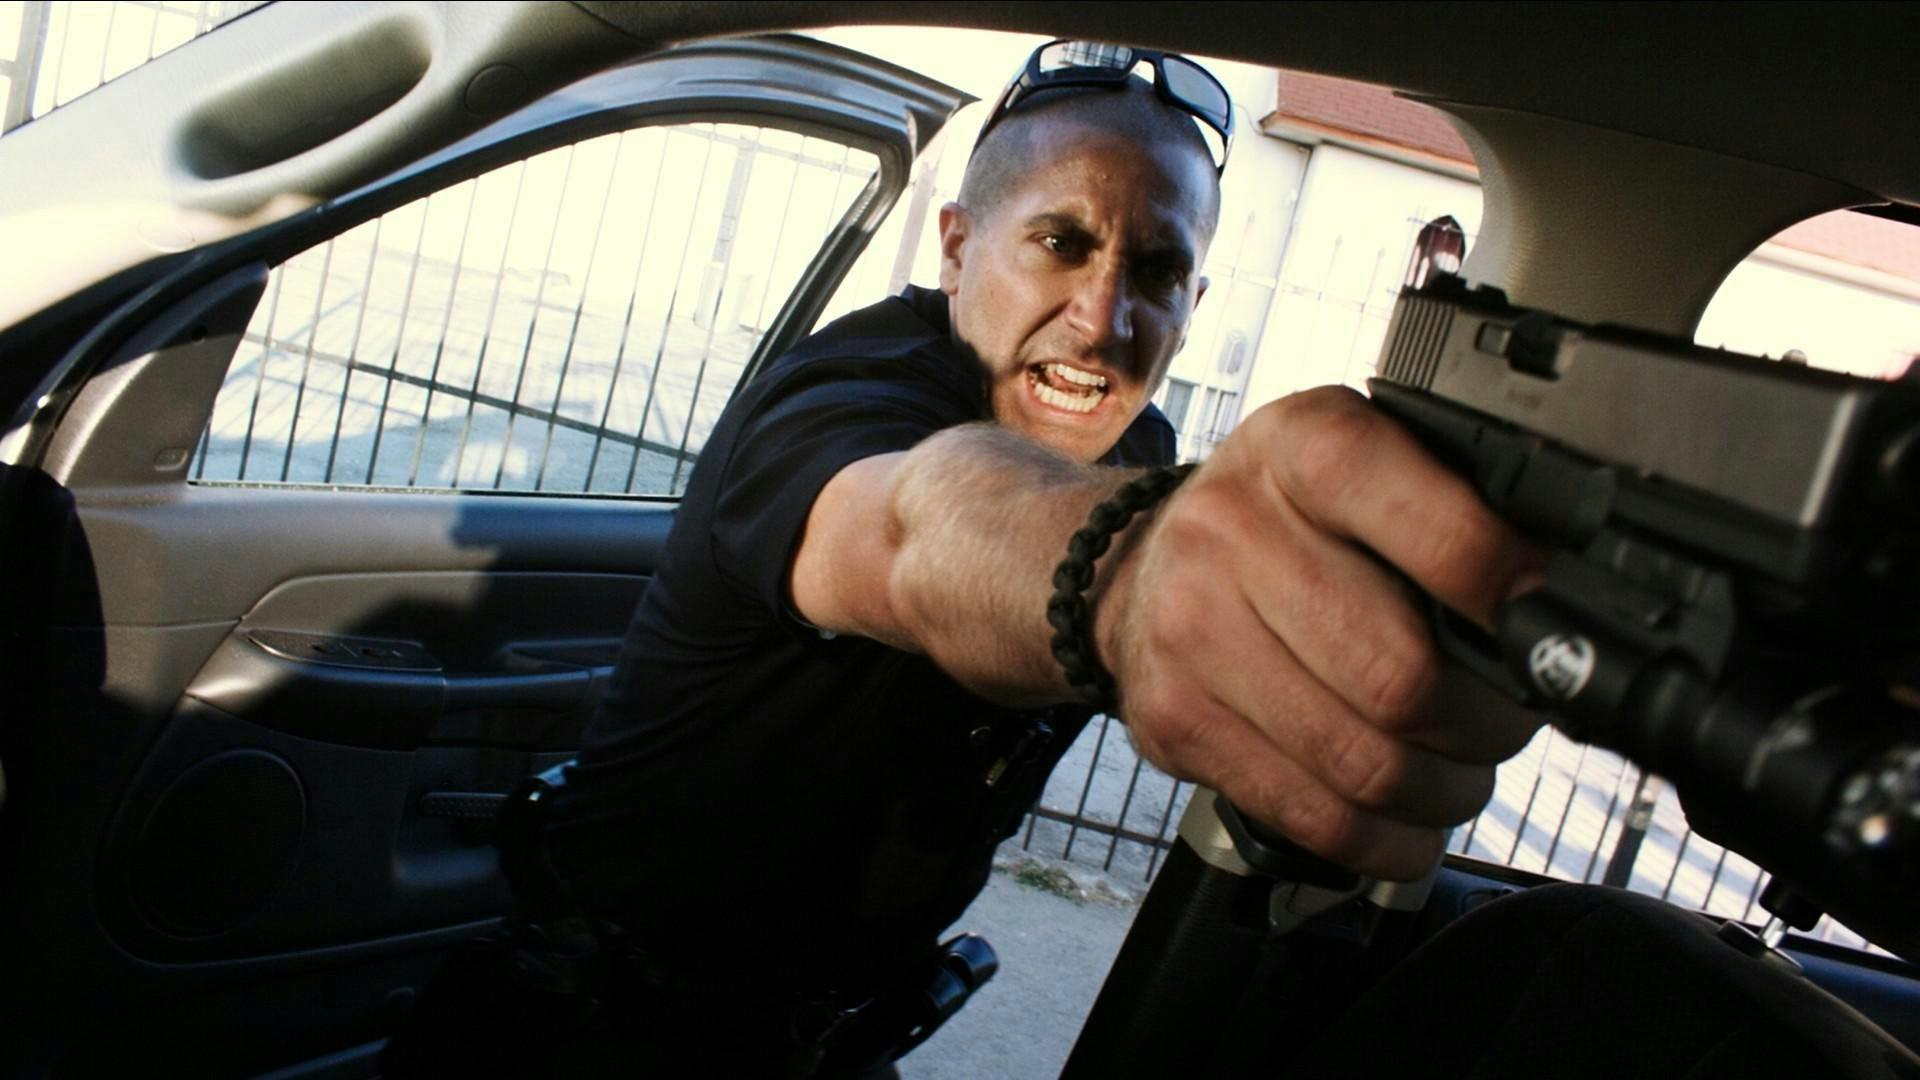 Brian Taylor (Jake Gyllenhaal) in End of Watch (2012) wears all black, sunglasses, and a dark bracelet in this intense, close-up shot. He brandishes a gun towards someone offscreen.